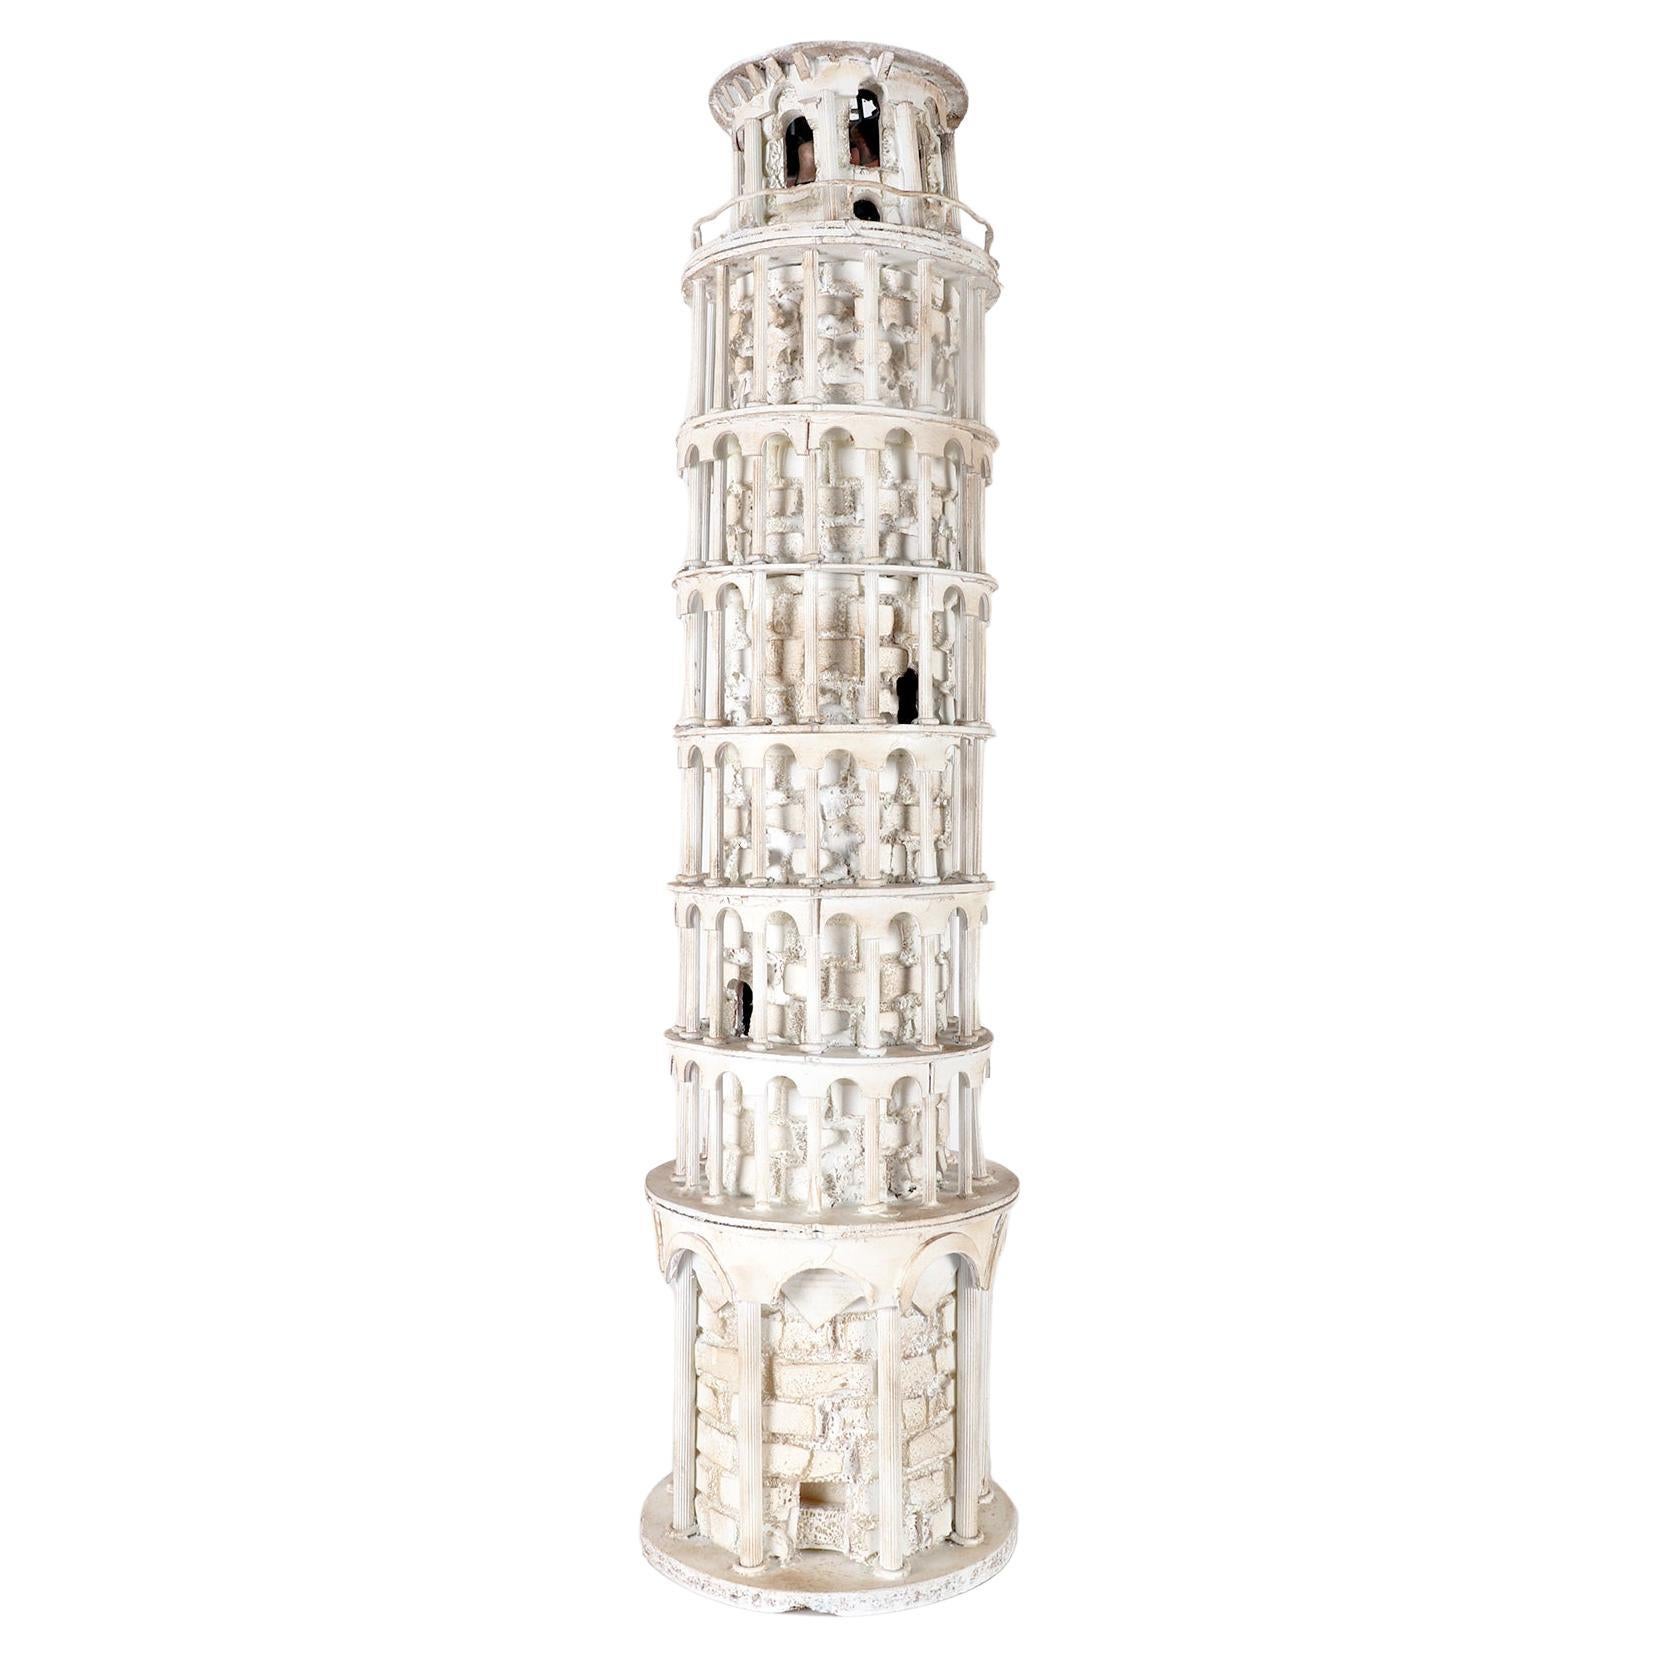 A Grand Tour wooden maquette, depicting the Tower of Pisa, Italy 1950.